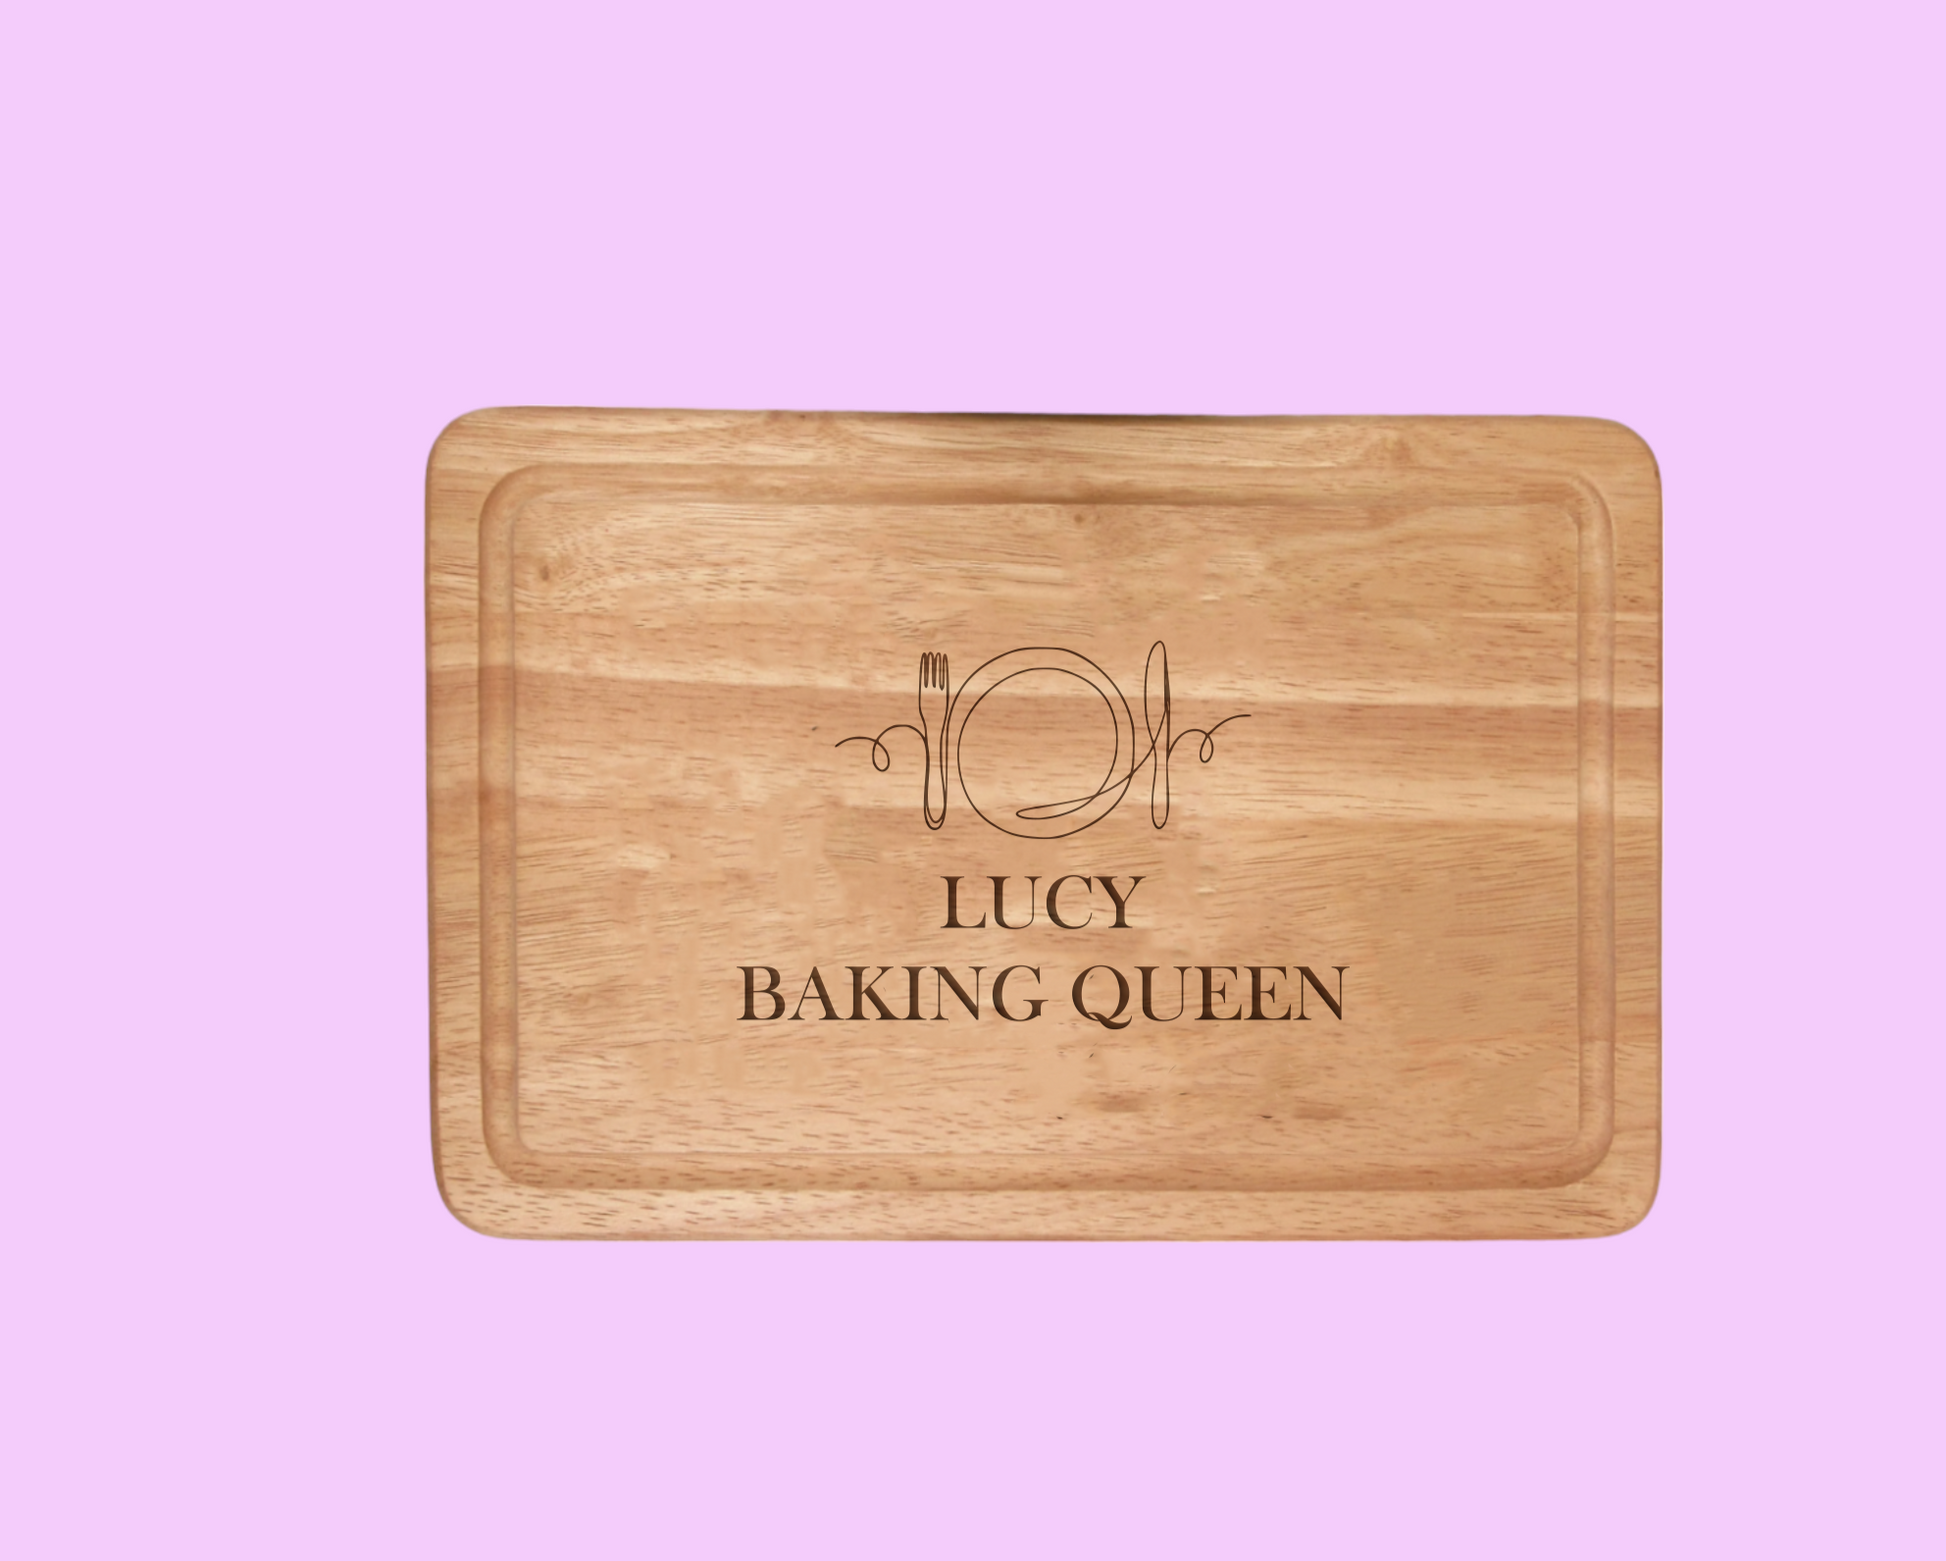 Enhance your kitchen with our Shopify store's 300x200mm Personalized Chopping Board Knife & Fork Design. Customize 2 lines, 20 characters each. Ideal for gifts and daily use!